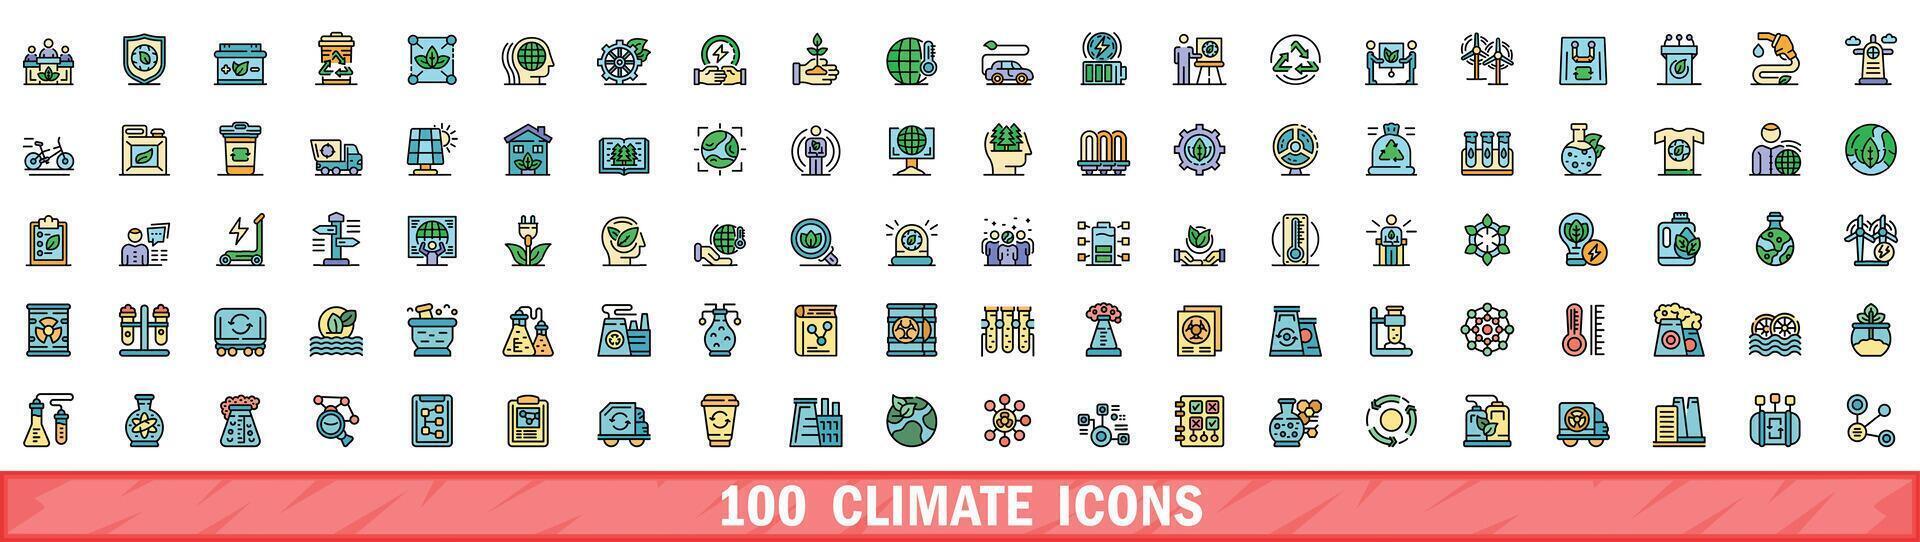 100 climate icons set, color line style vector